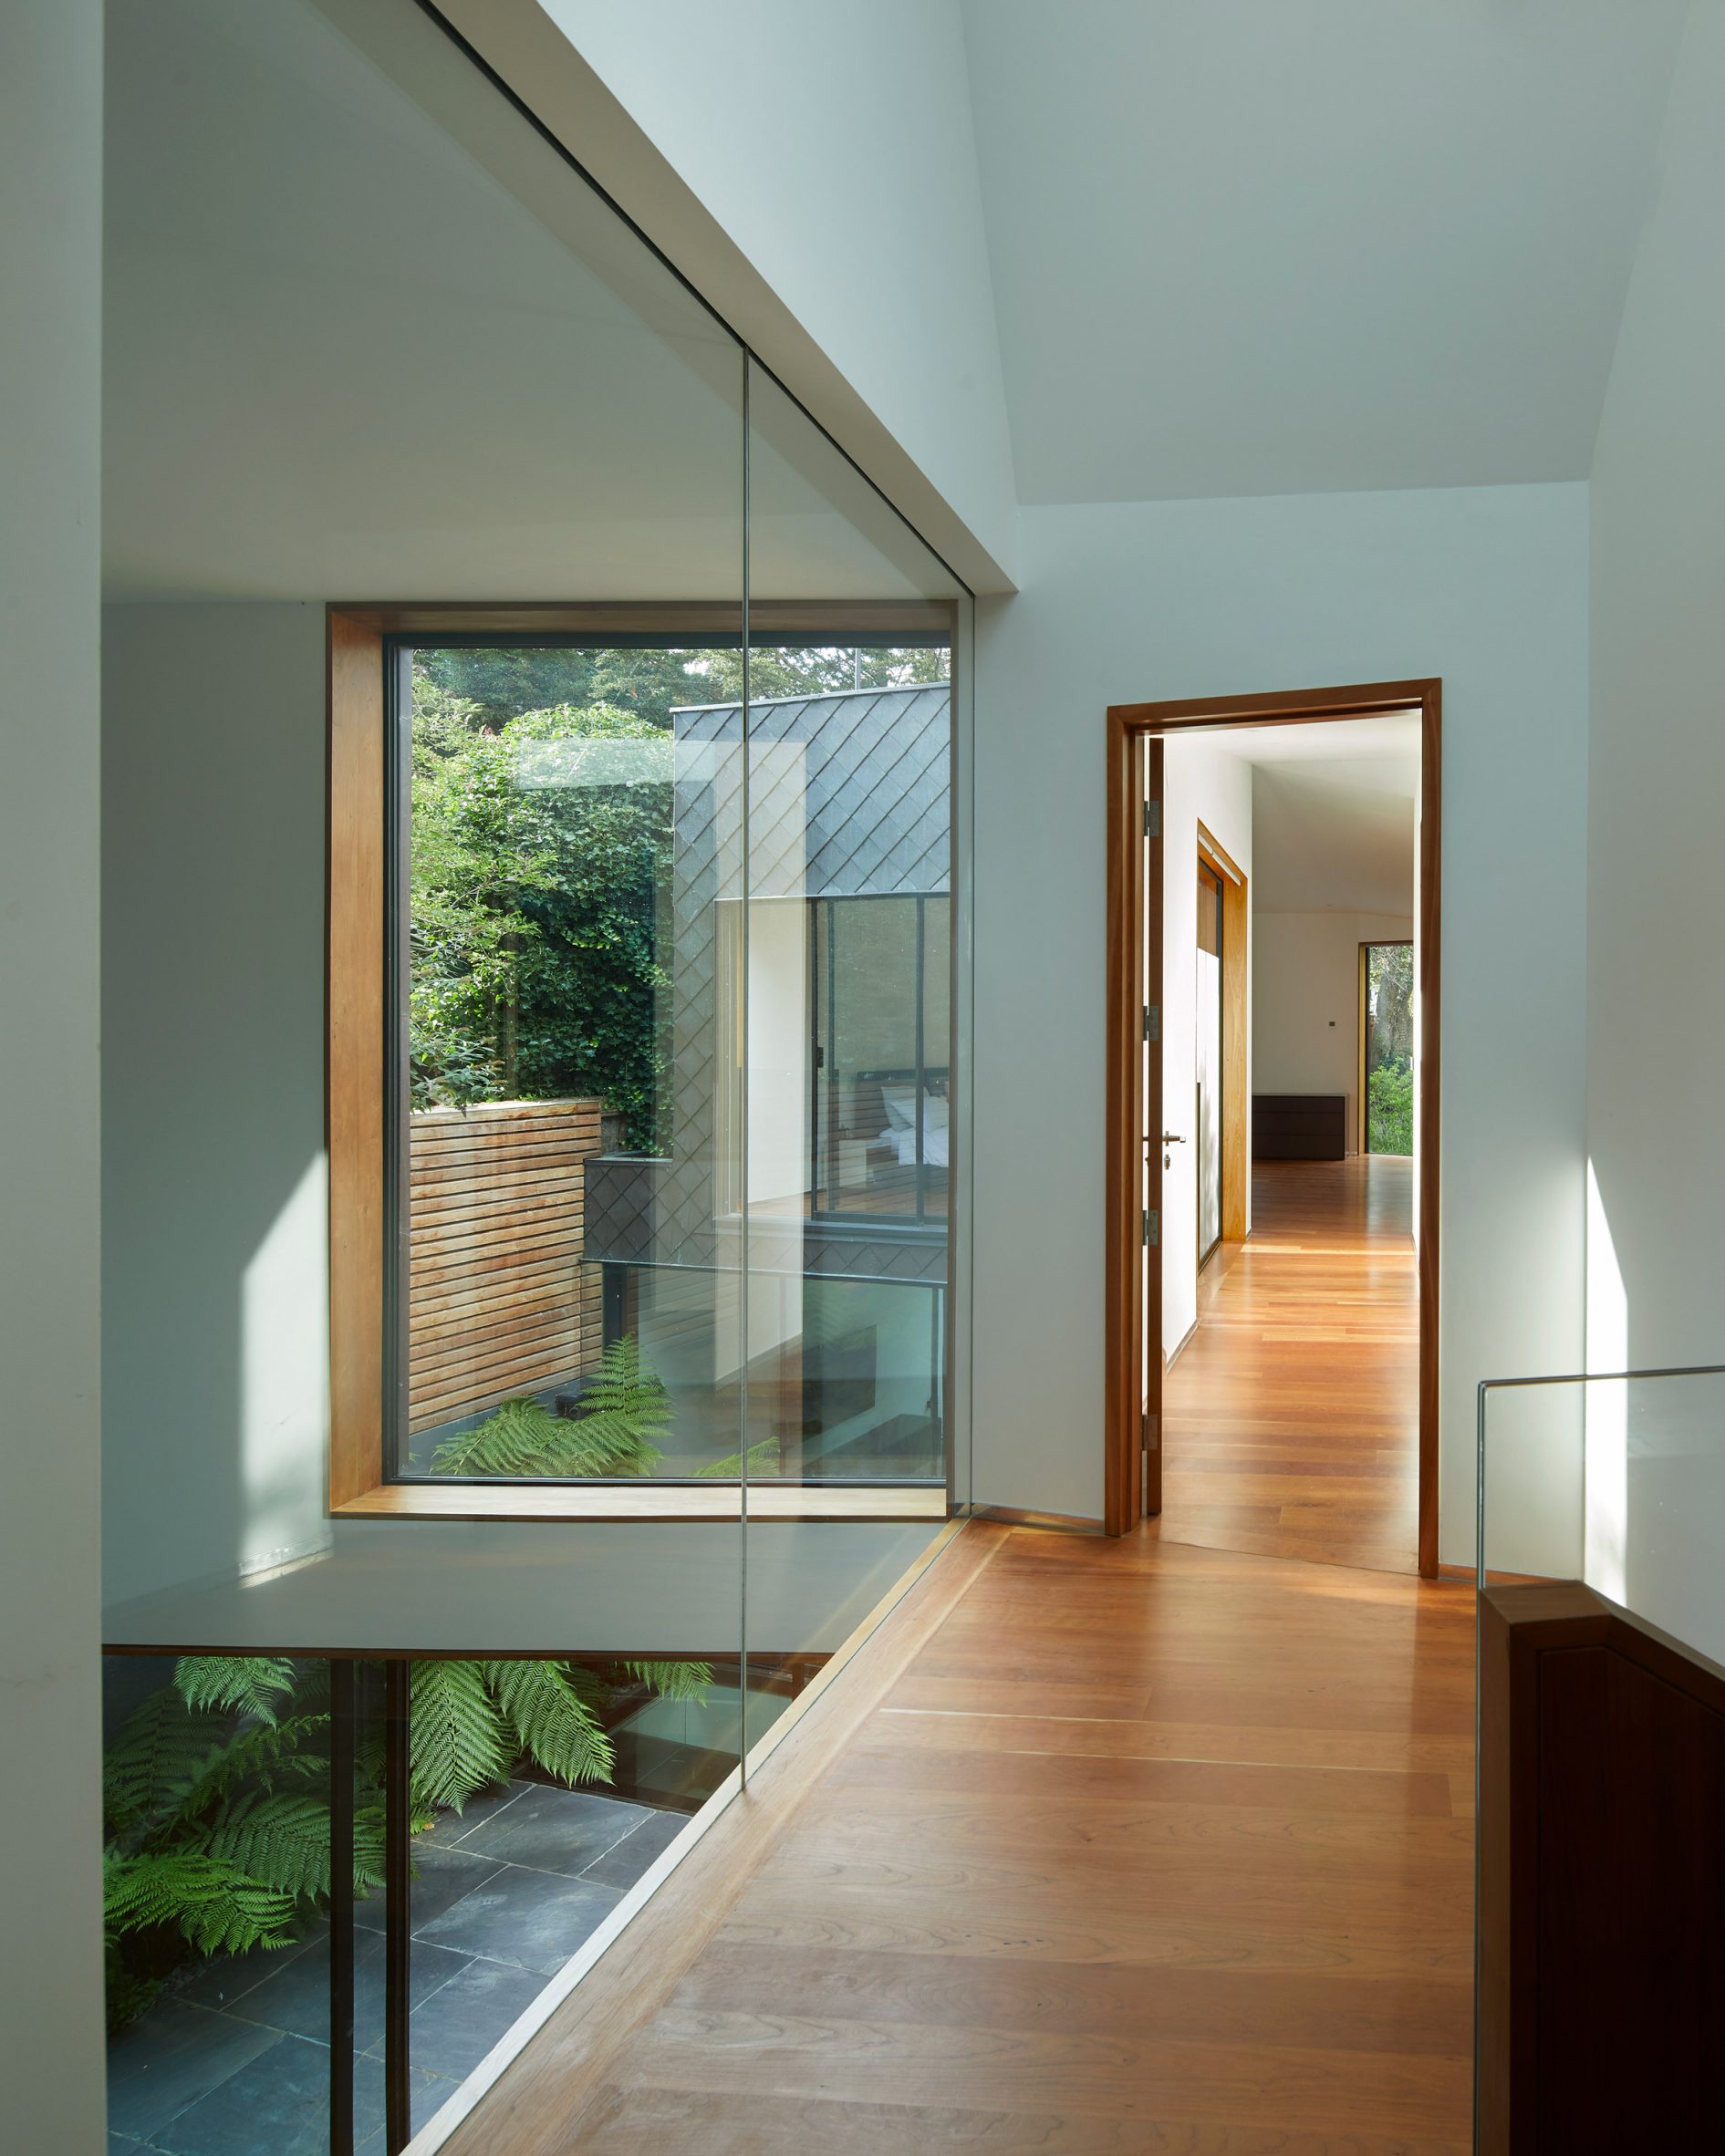 Interior of Mesh House by Alison Brooks Architects